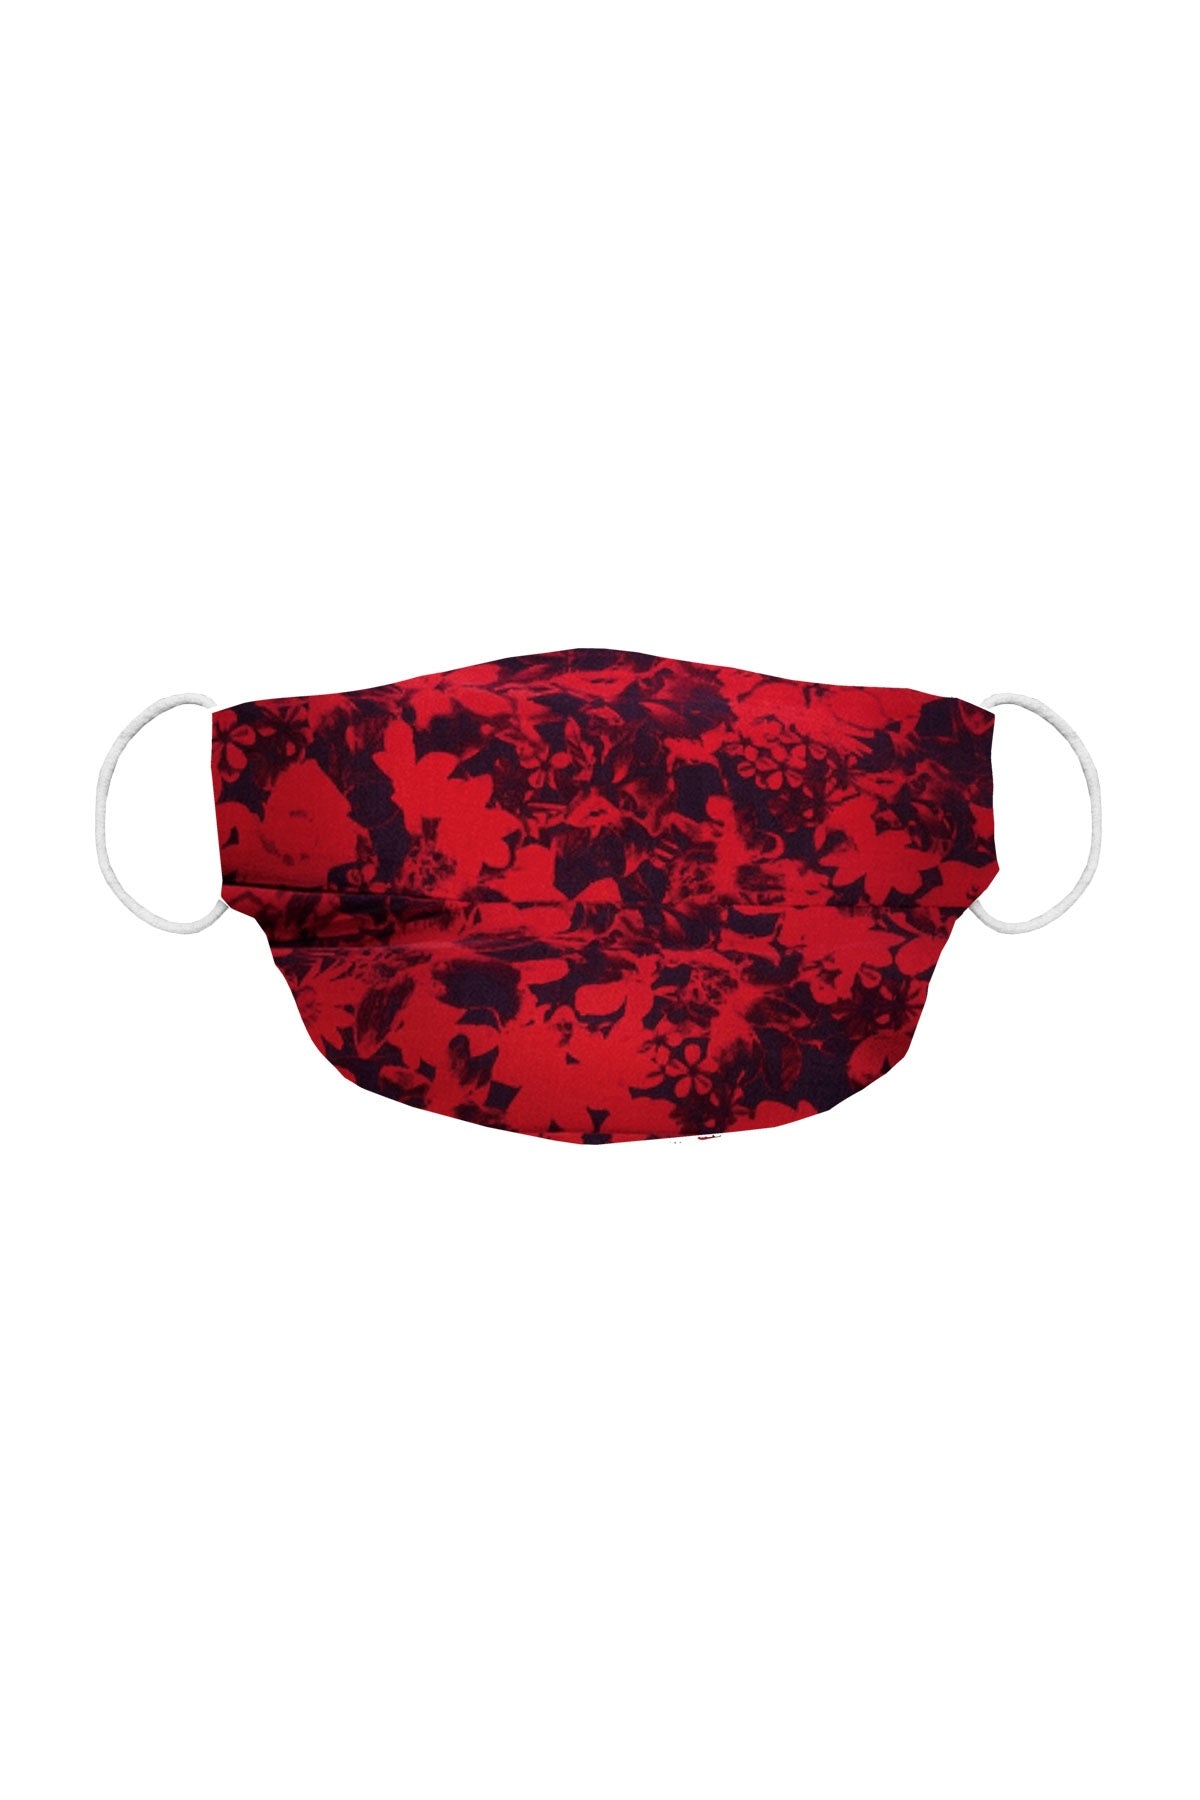 Silk Face Mask - Red Floral